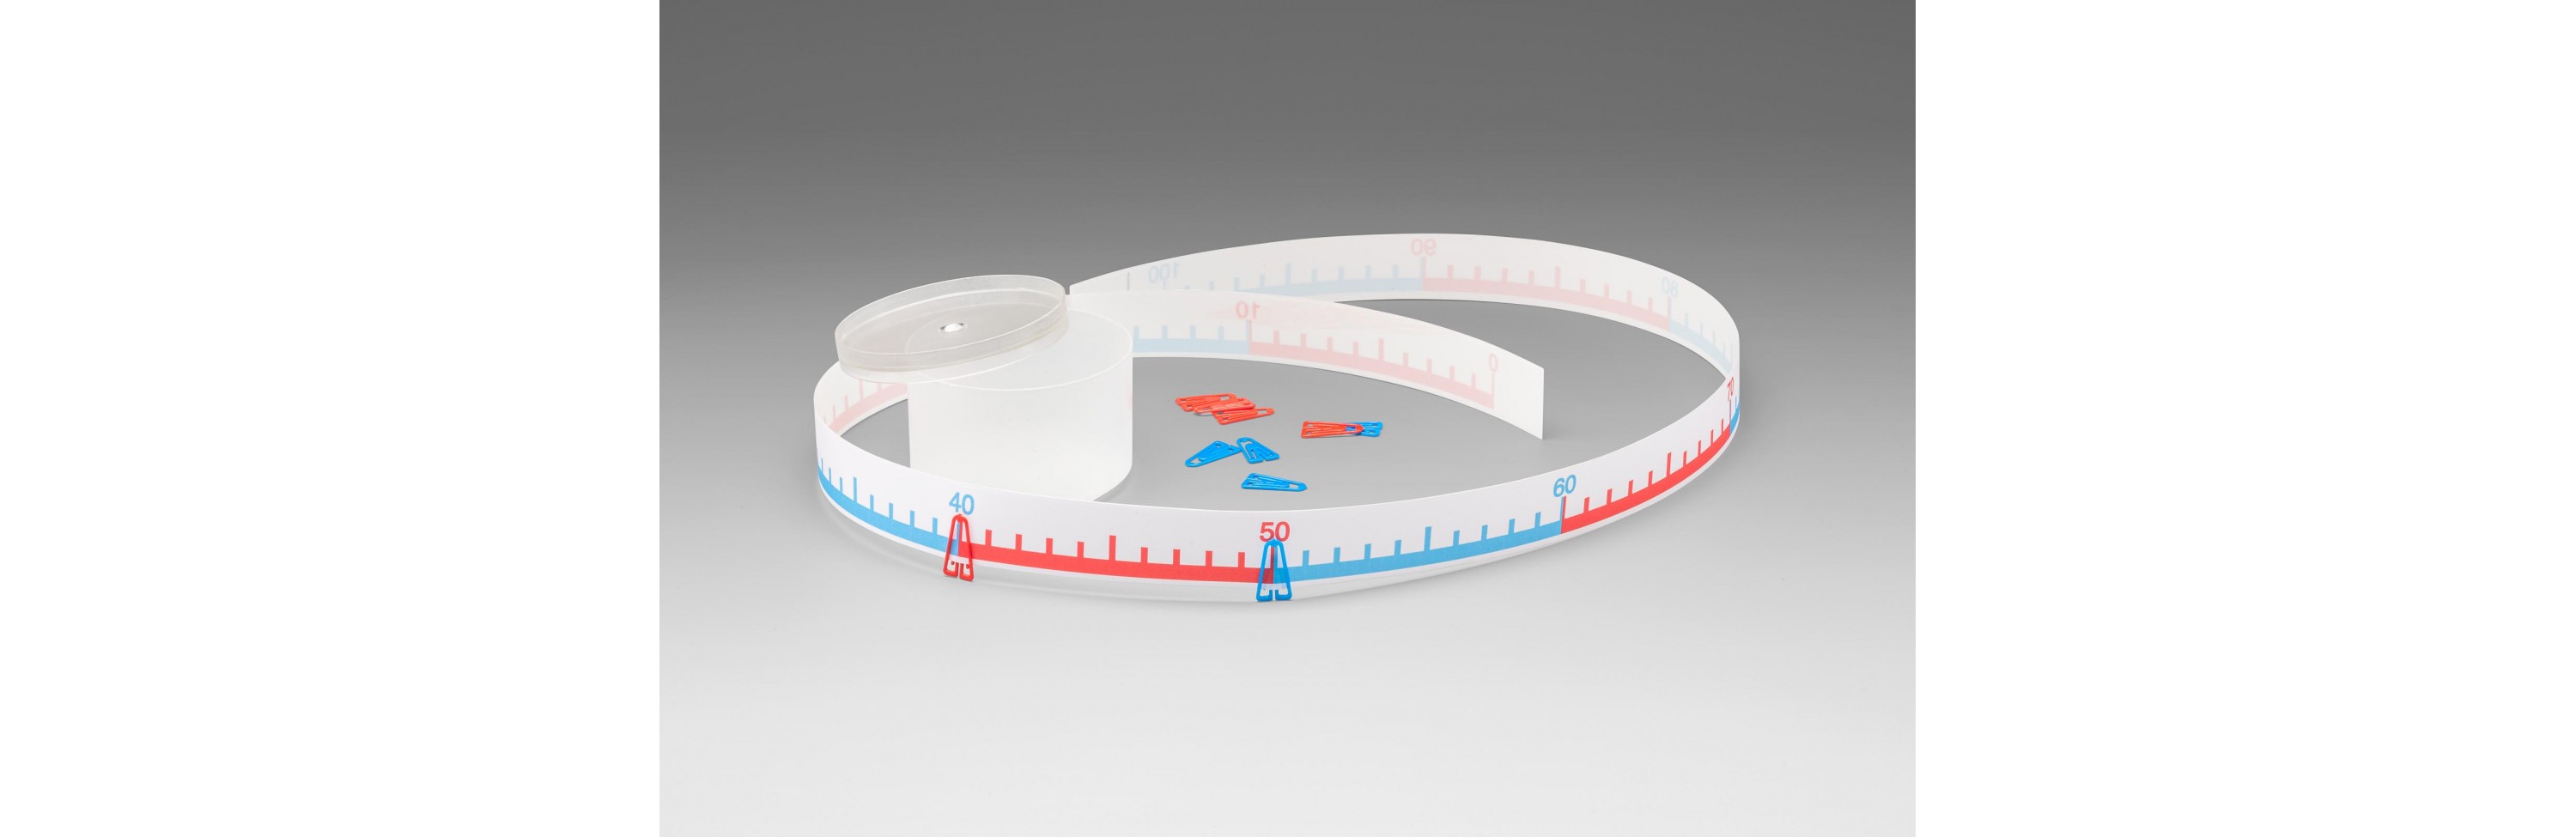 Wissner® active learning - Number Line Band range of 100 1m long RE-Plastic®